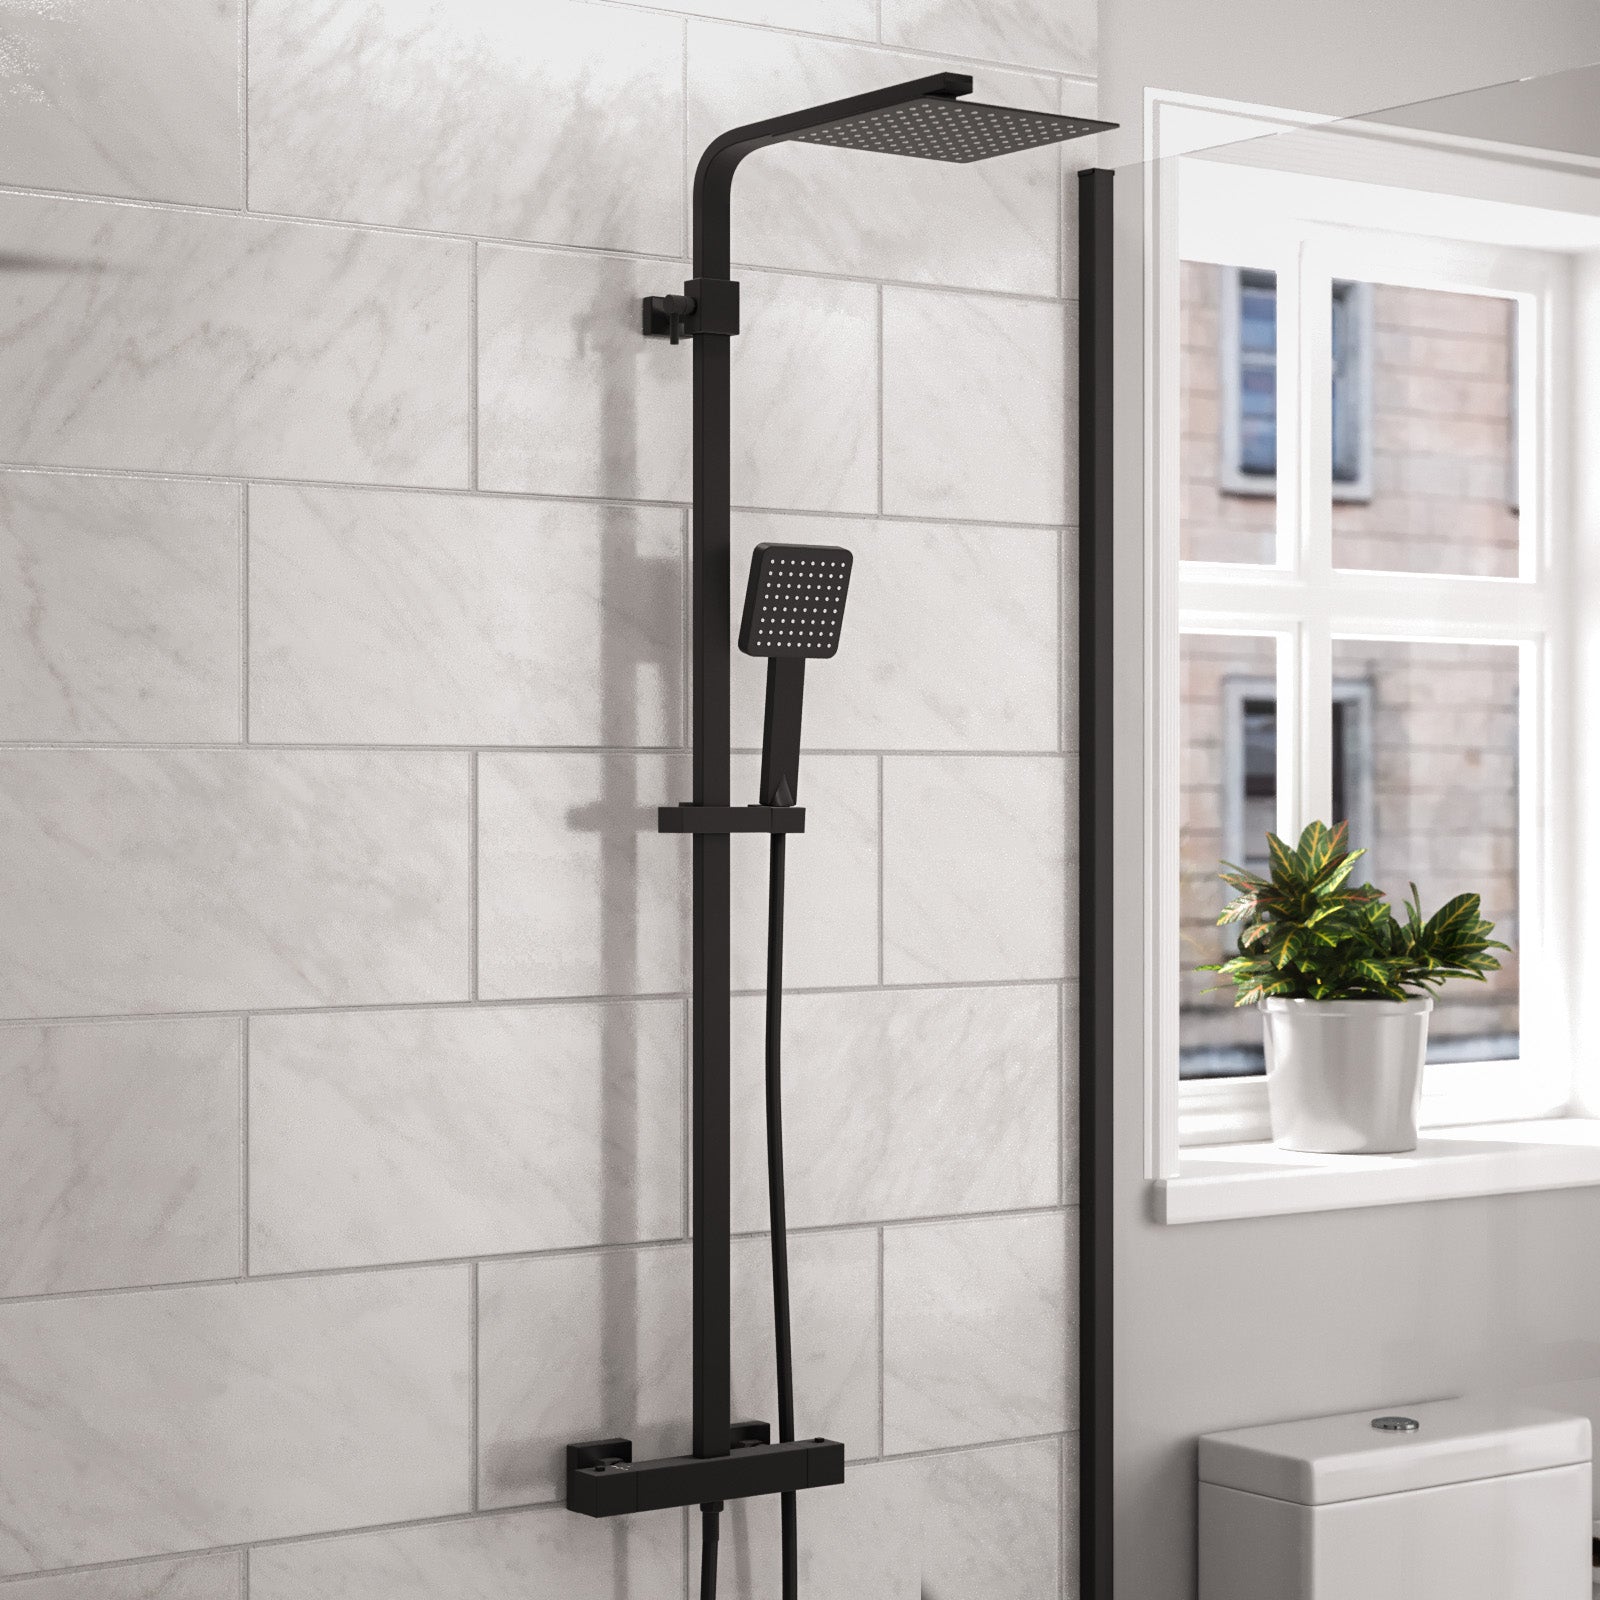 Modern Square Matte Black Exposed Thermostatic Mixer Shower Set With Easy Fittings